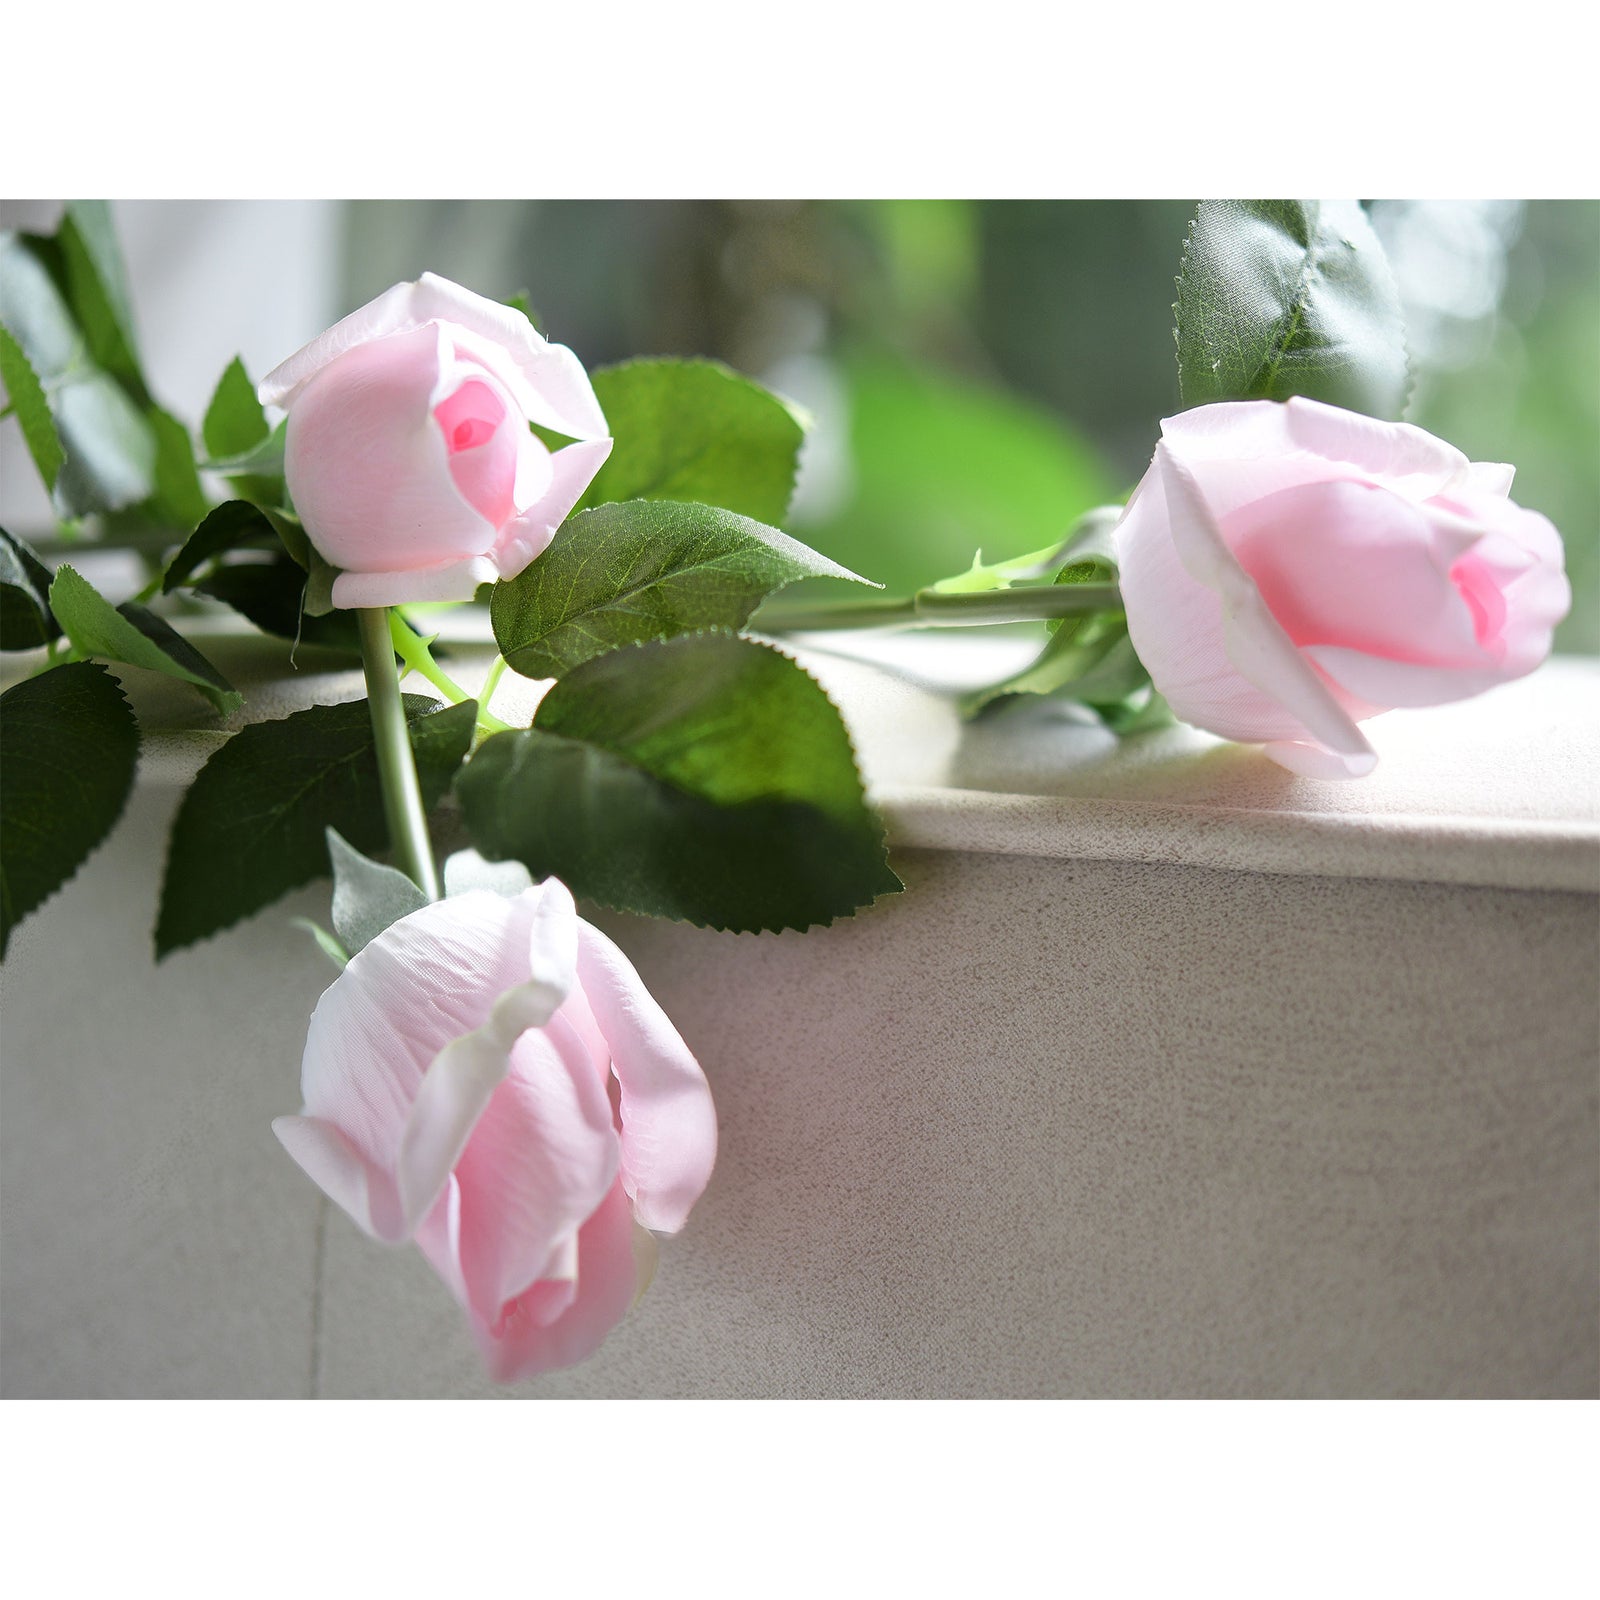 Pale Pink Long Stem 21 inches Roses Real Touch Silk Artificial Flowers 12 Stems